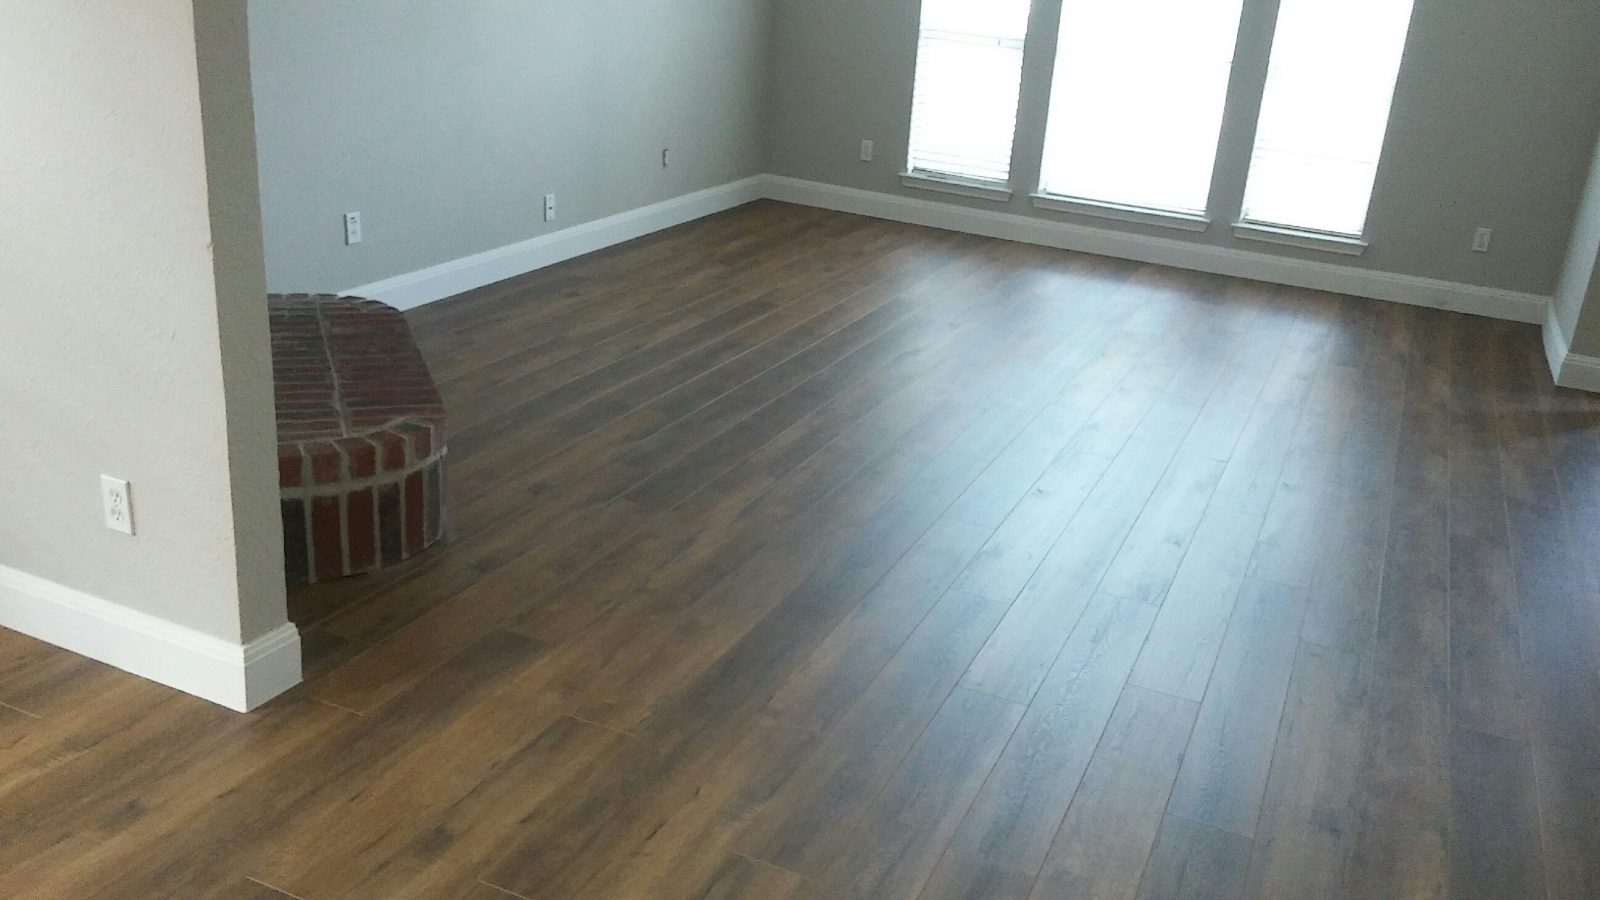 New Laminate Floors Baseboards And Paint Ft Worth Tx Gc